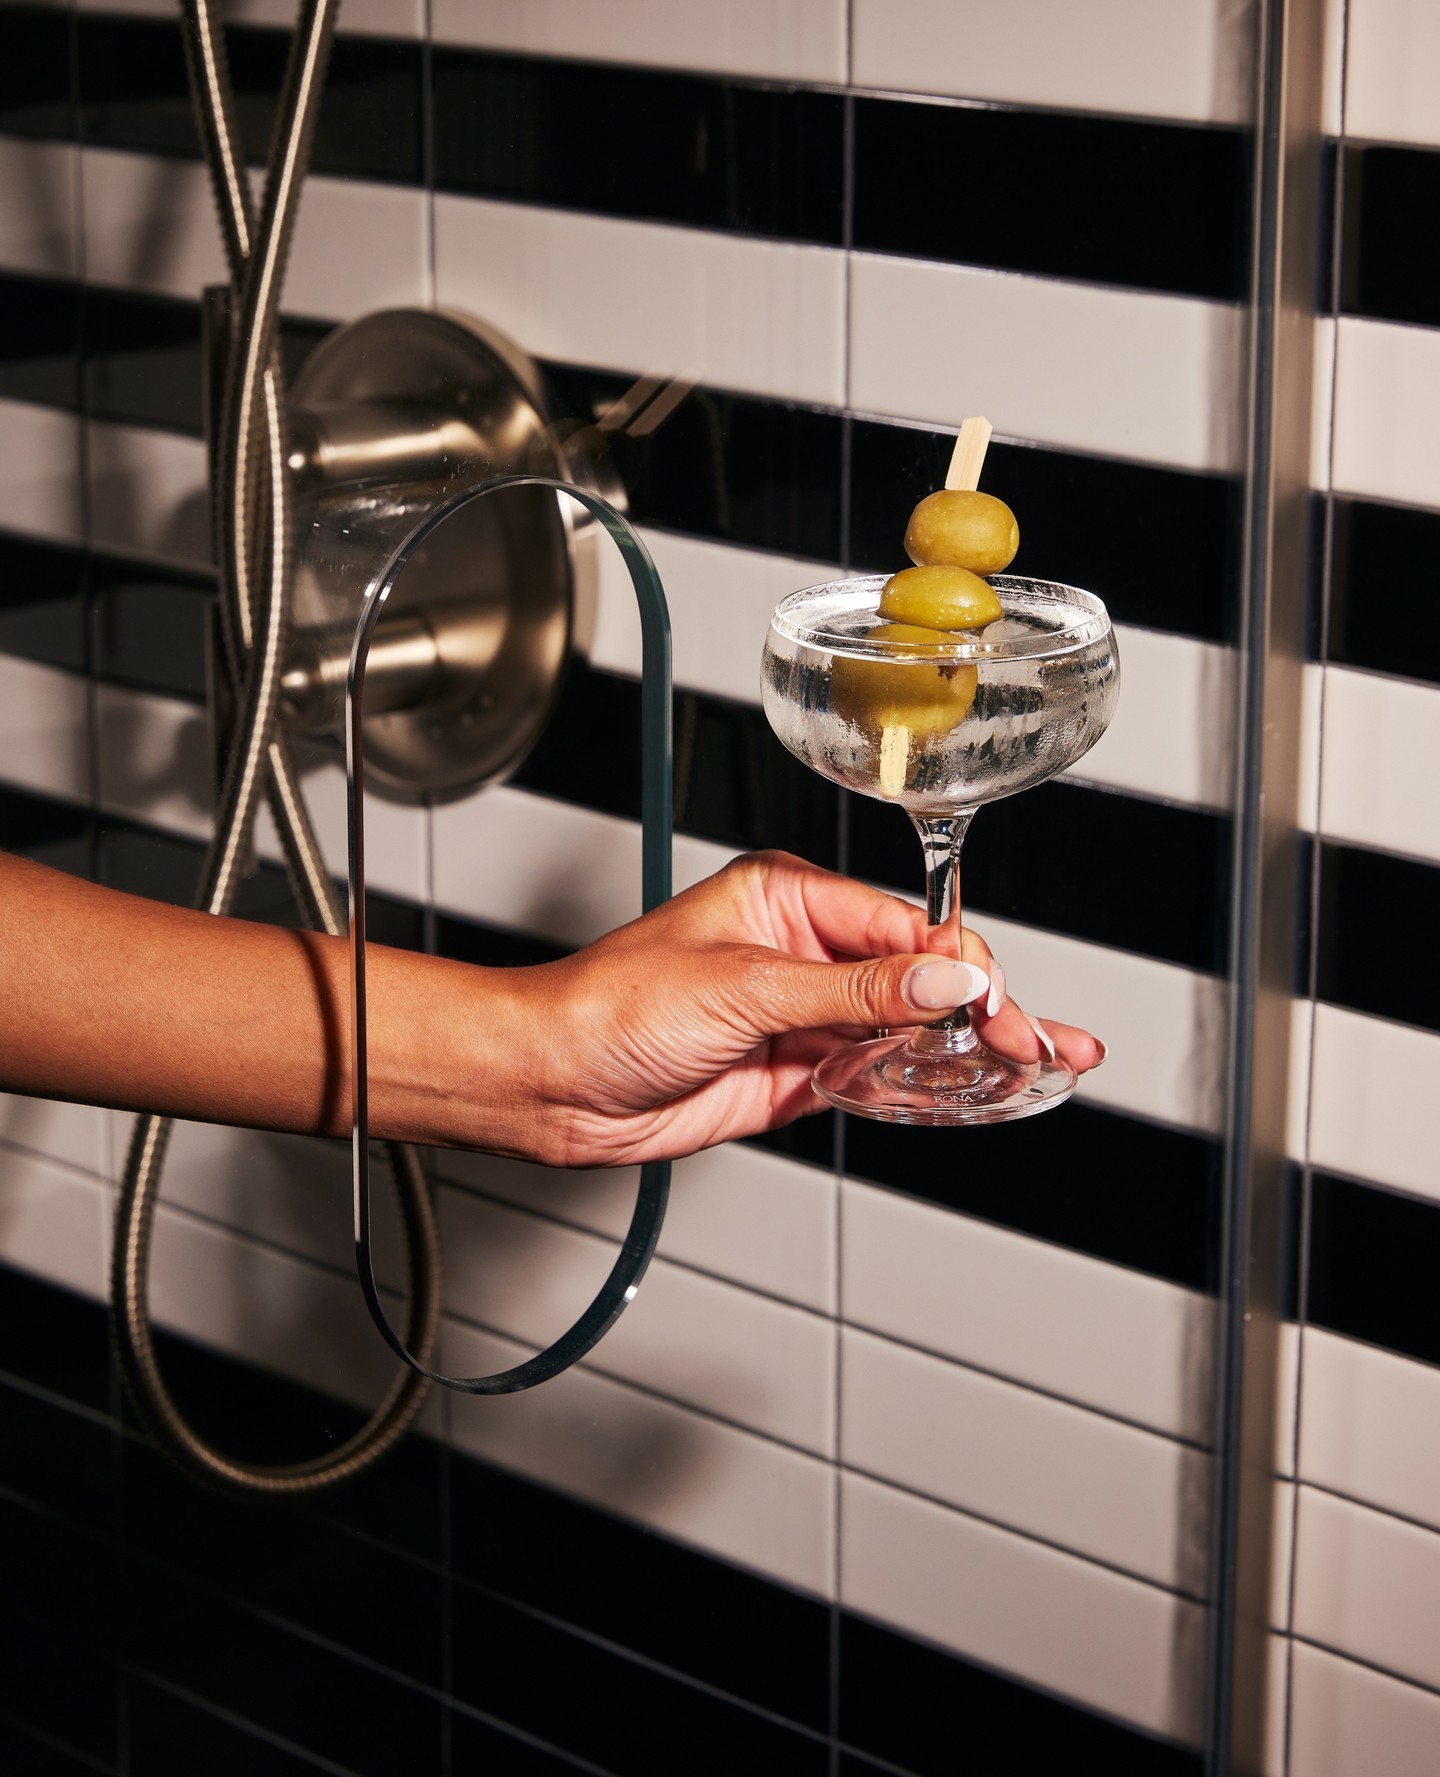 because martini time shouldn't stop in the shower, darling. take your glam sessions to the next level - with martinis in hand.⁠
⁠
now, will that be vodka or gin?⁠
⁠⁠
photo: @nschinco